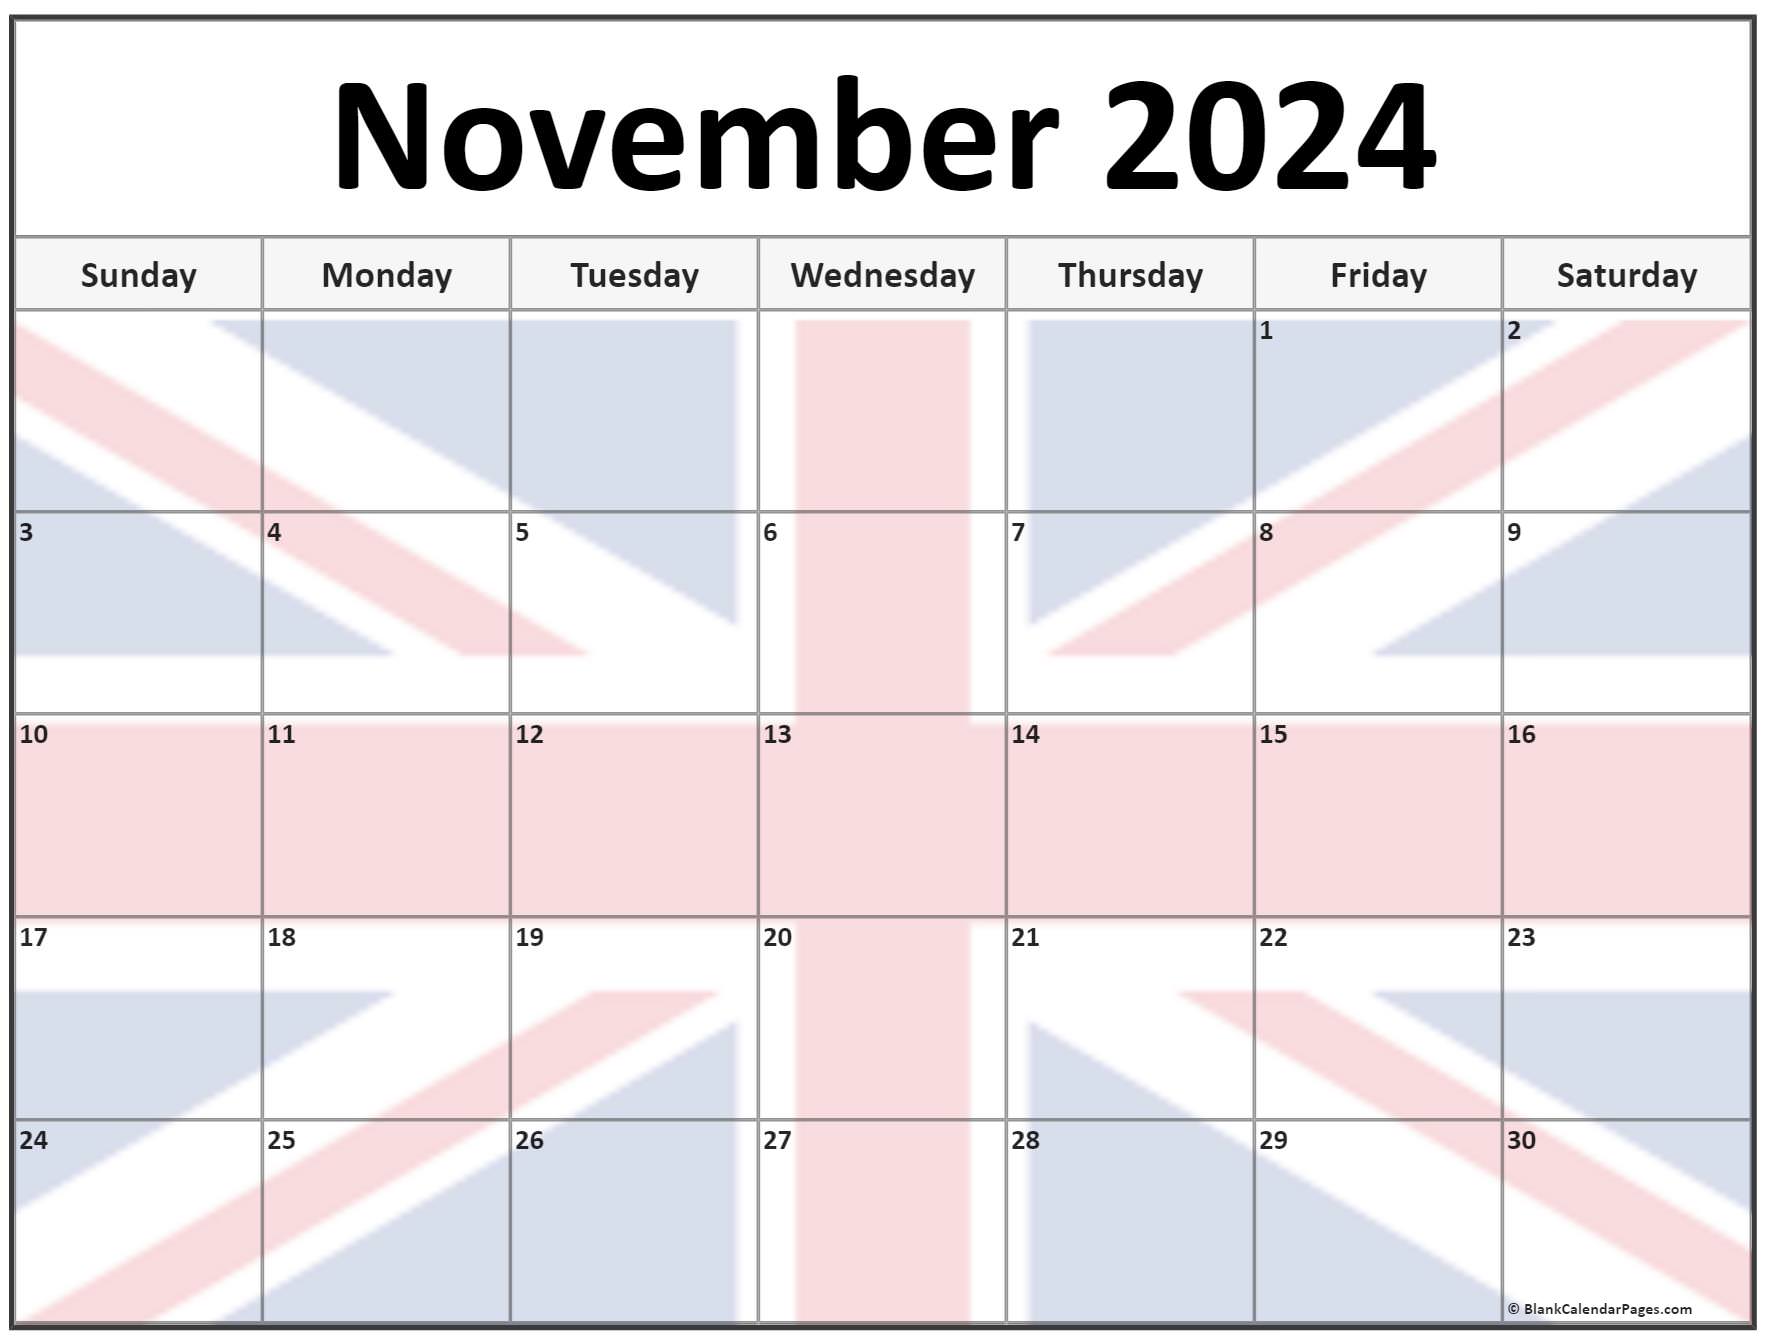 Collection of November 2024 photo calendars with image filters.